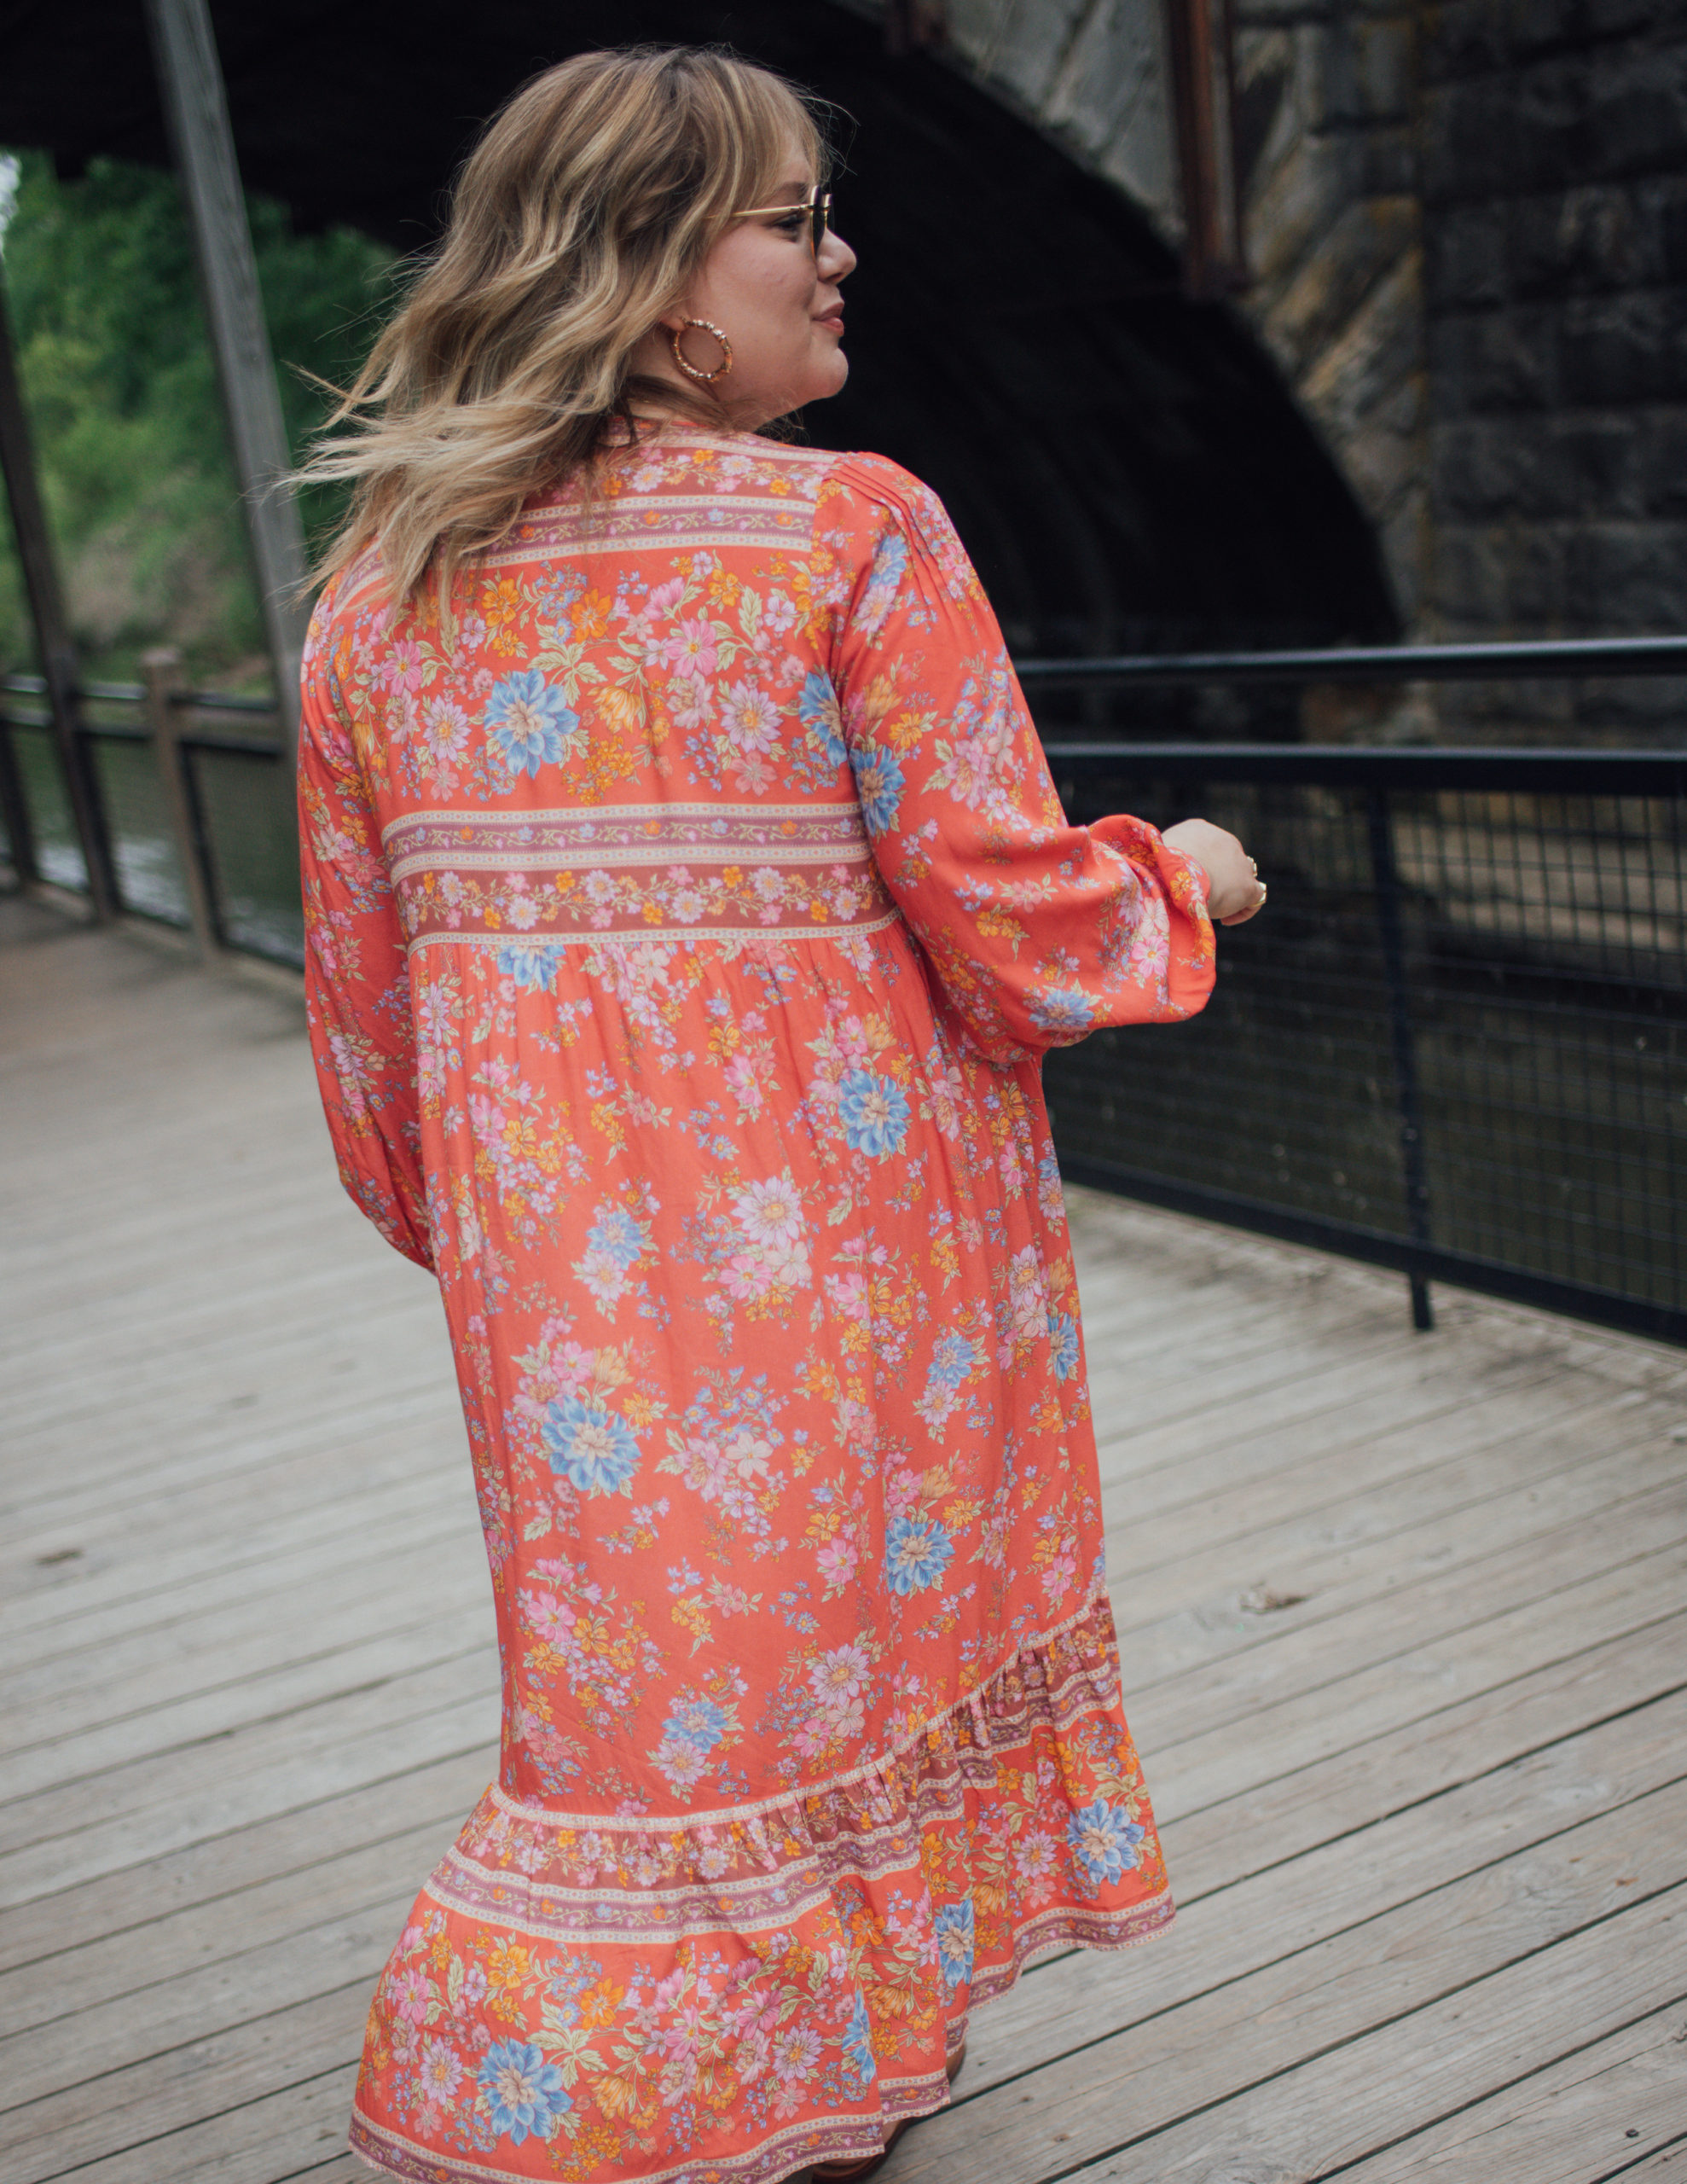 Sharing an early fall outfit idea, for plus size boho style lovers. This is a look that is easy to recreate and looks good on everyone!